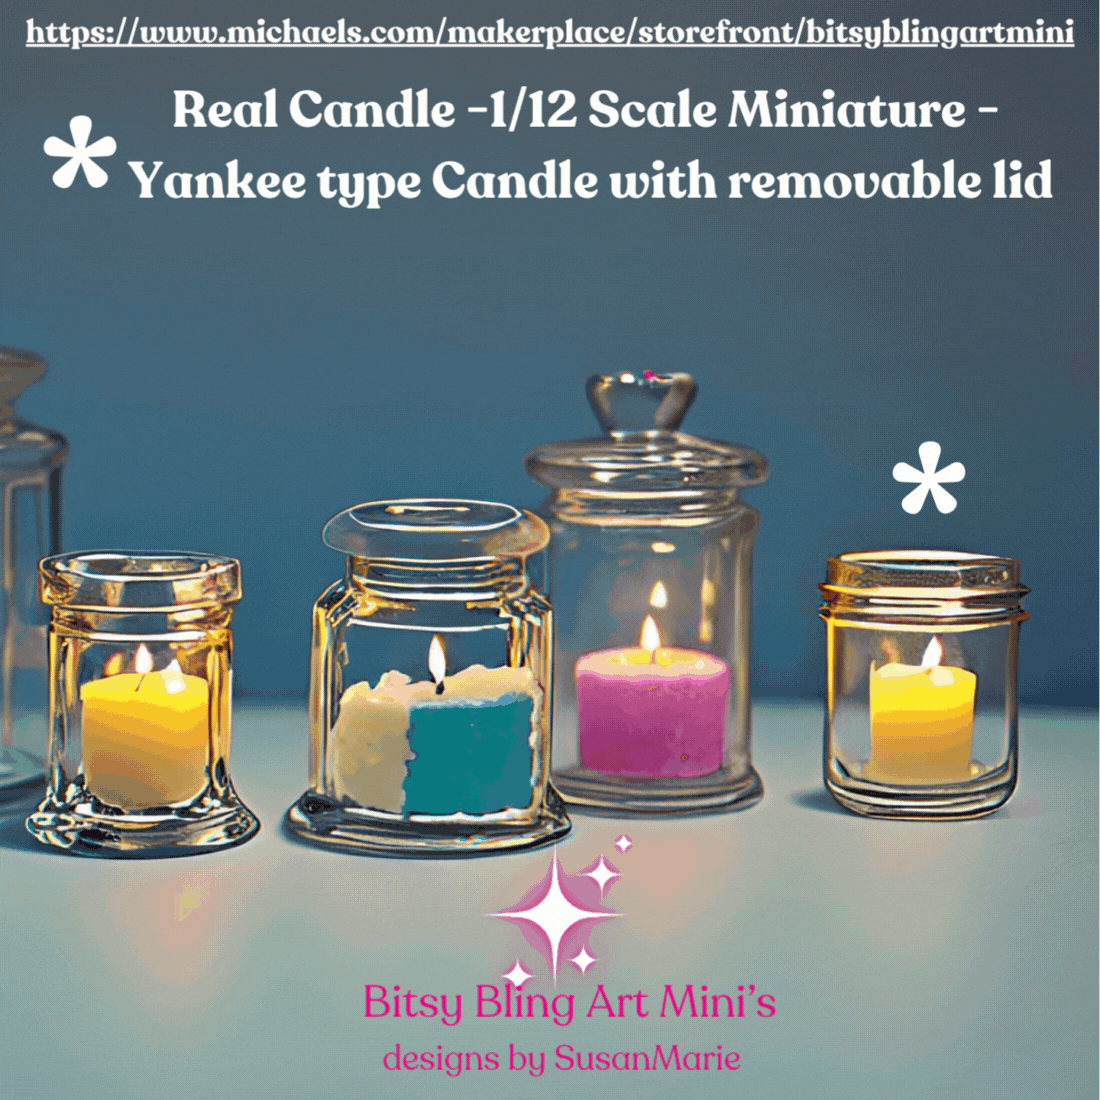 Handmade Miniature Candle for Fashion Dolls with Real Wax a Removable Lid and Wick - image1